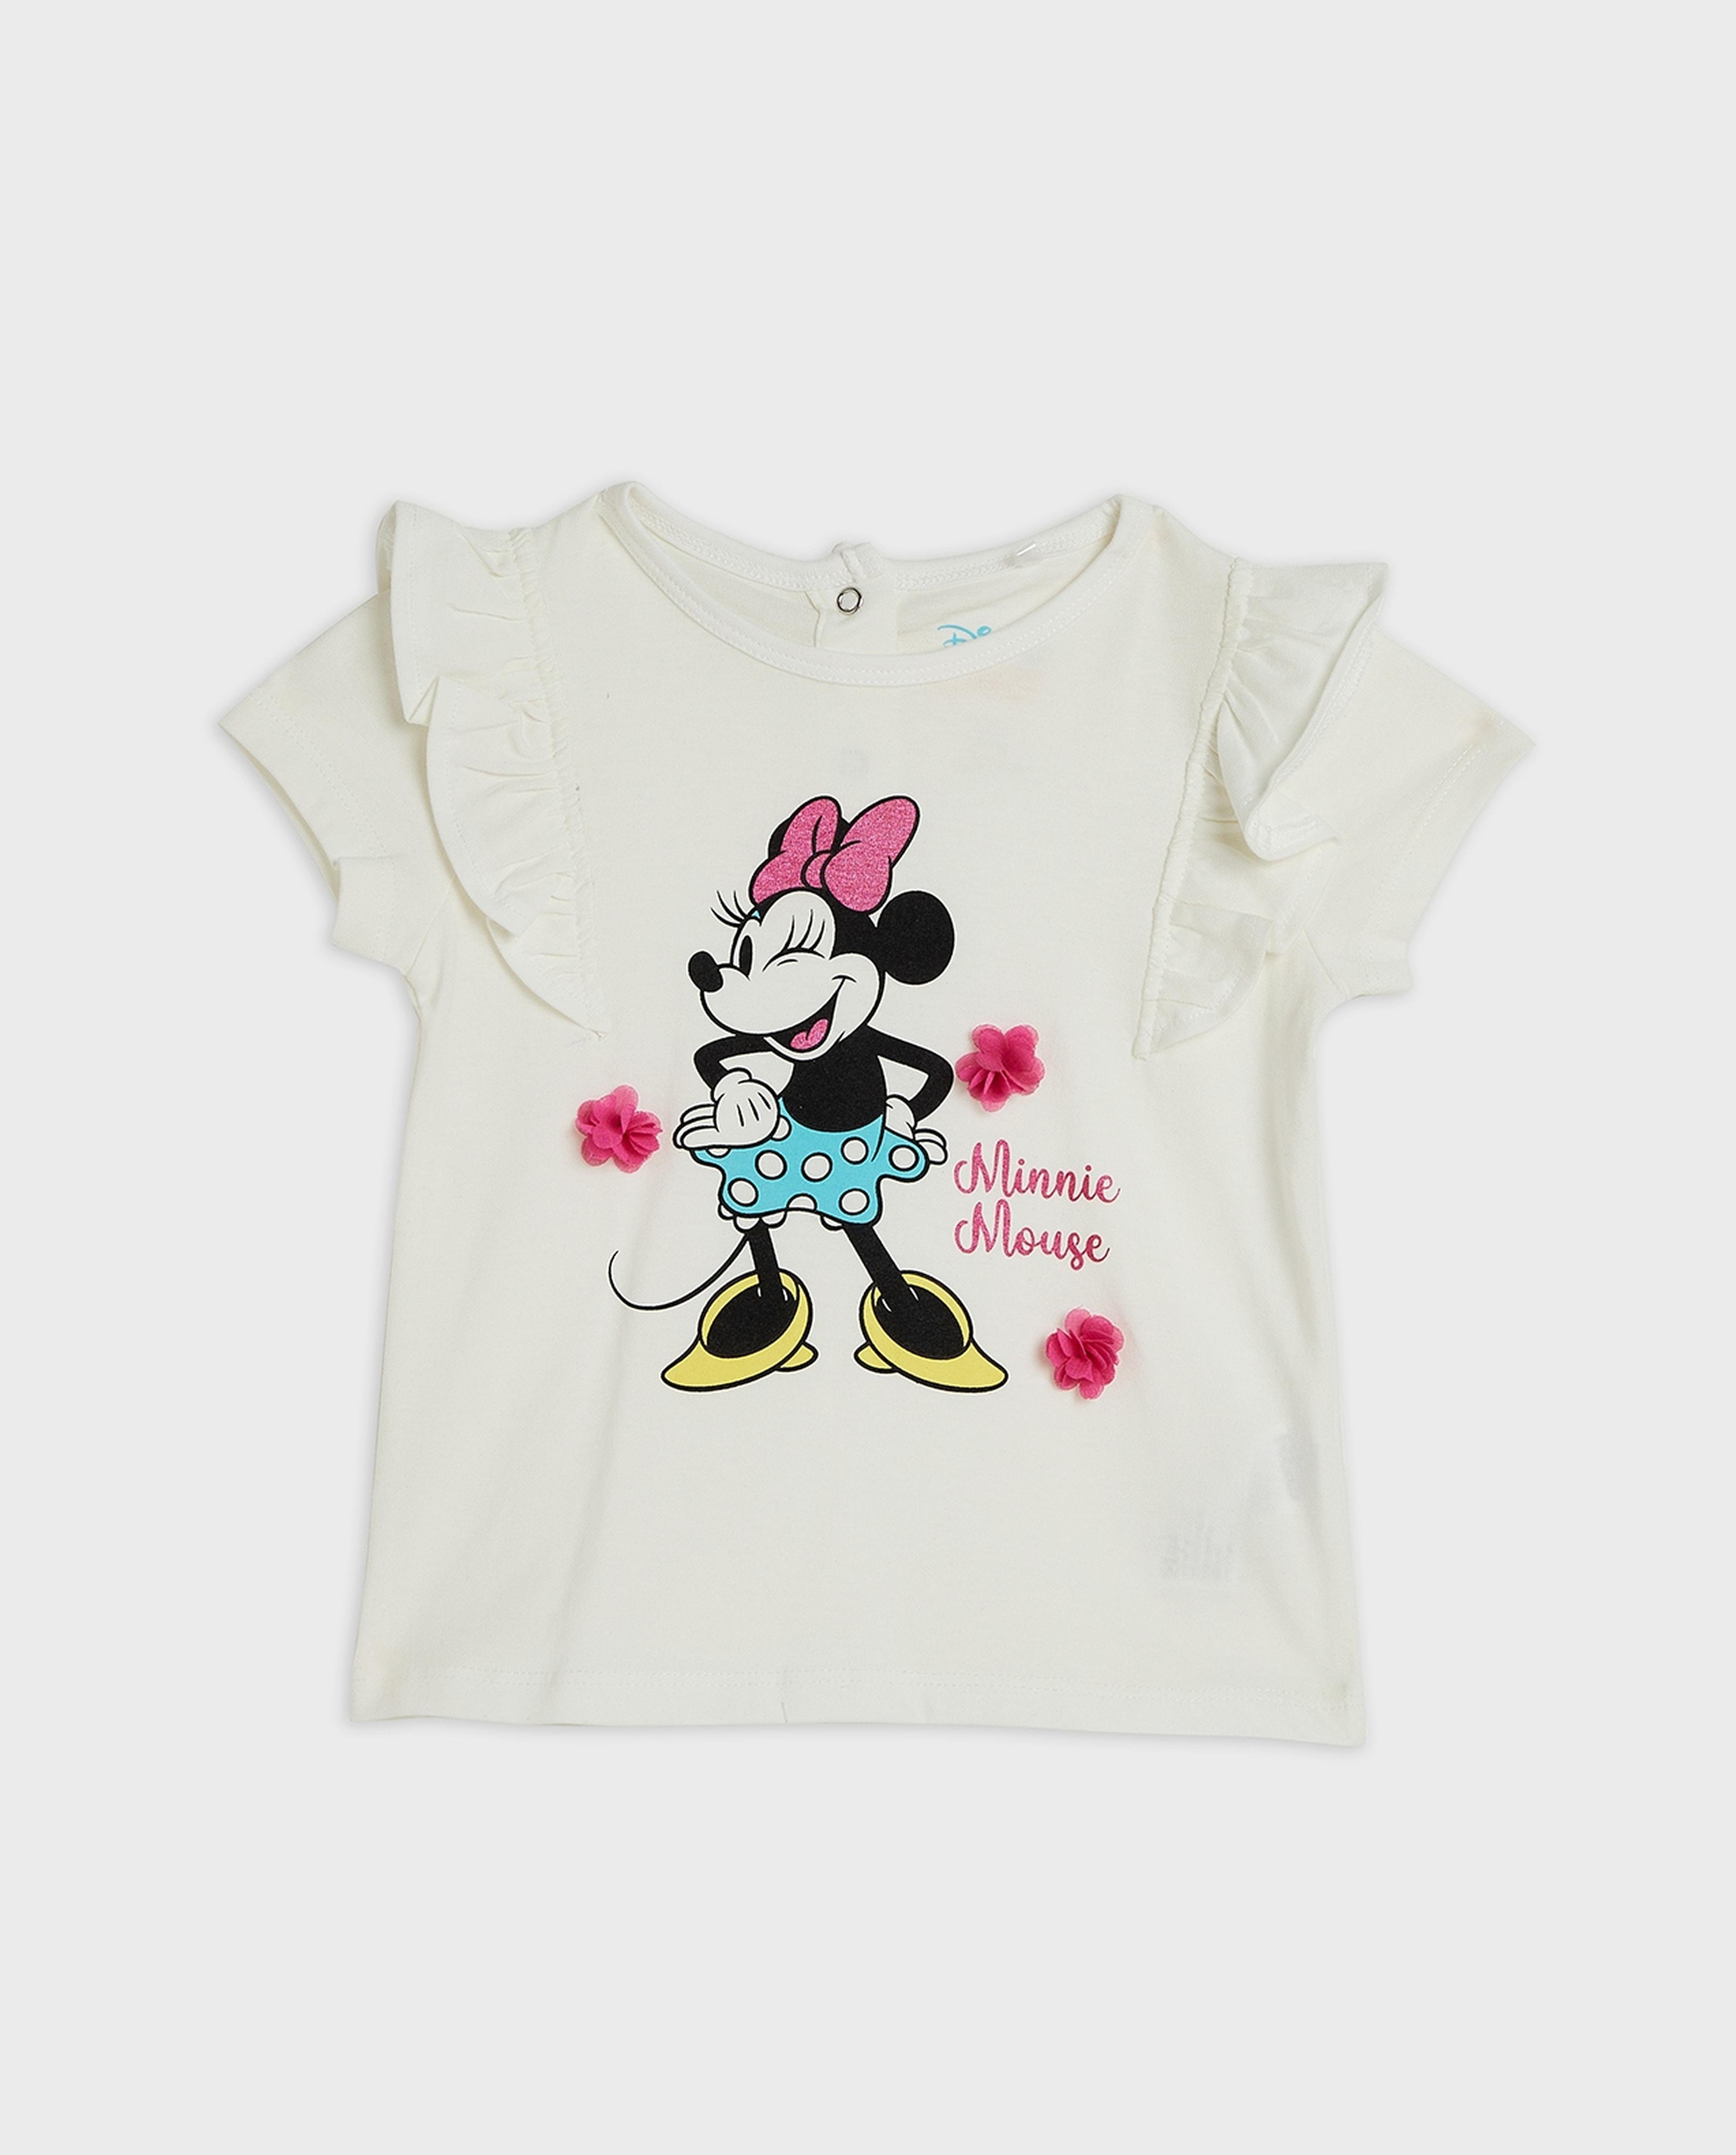 Minnie Mouse Print Top and Shorts Set